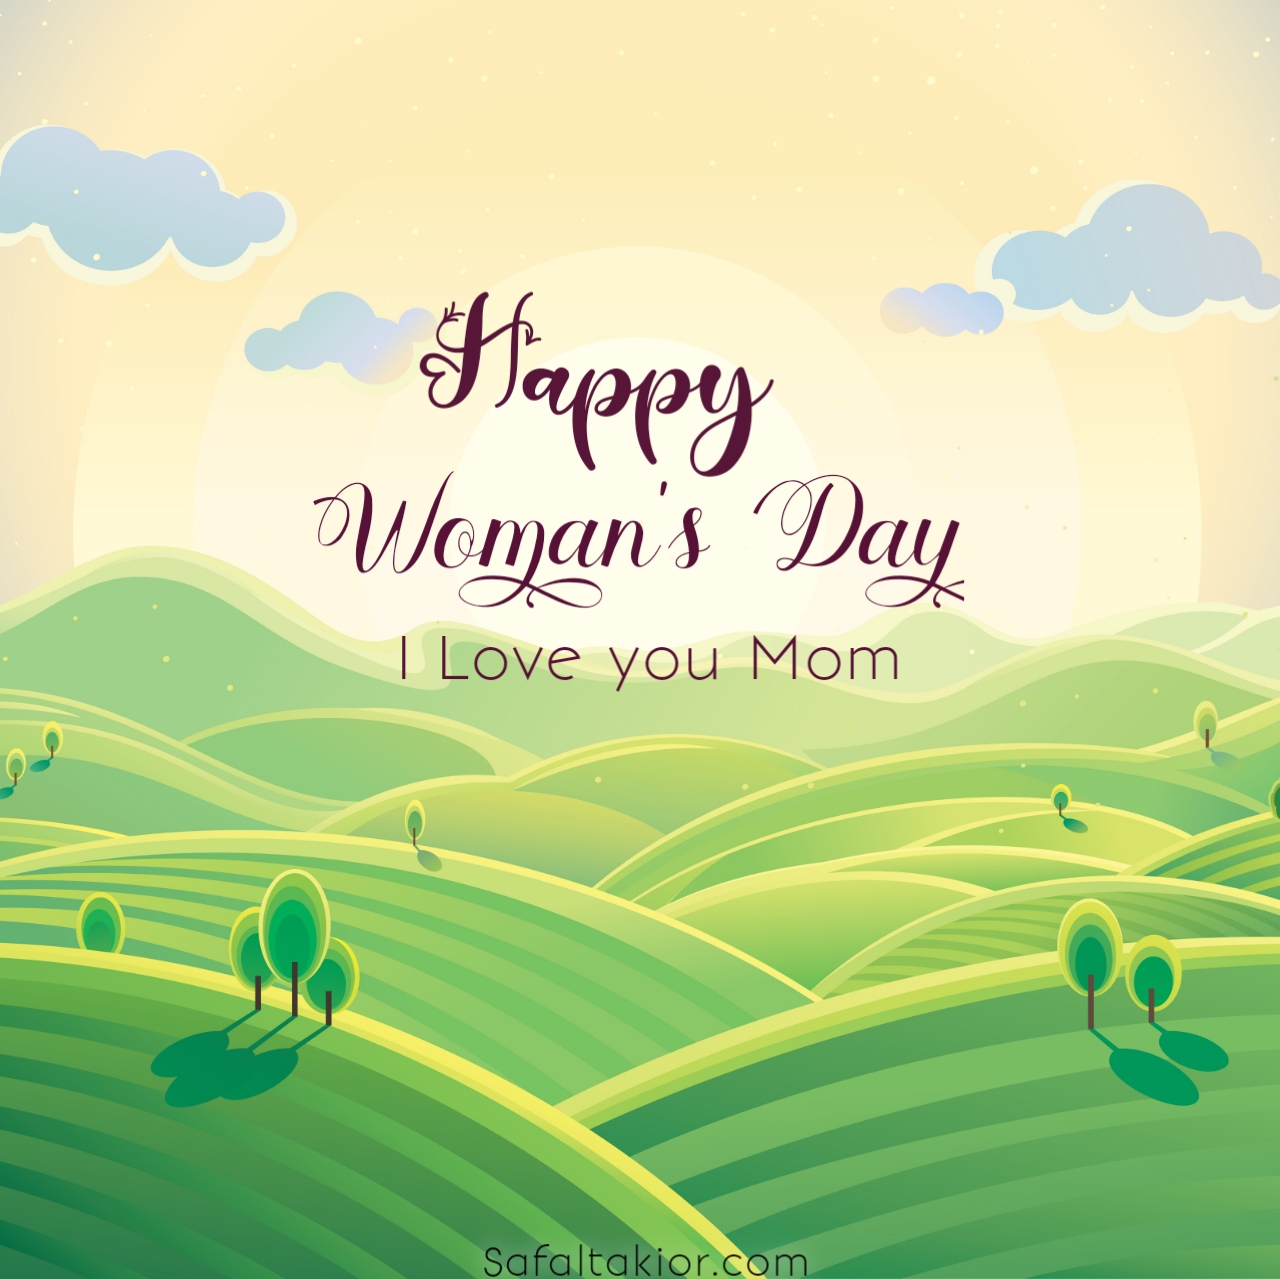 women's day images in hindi